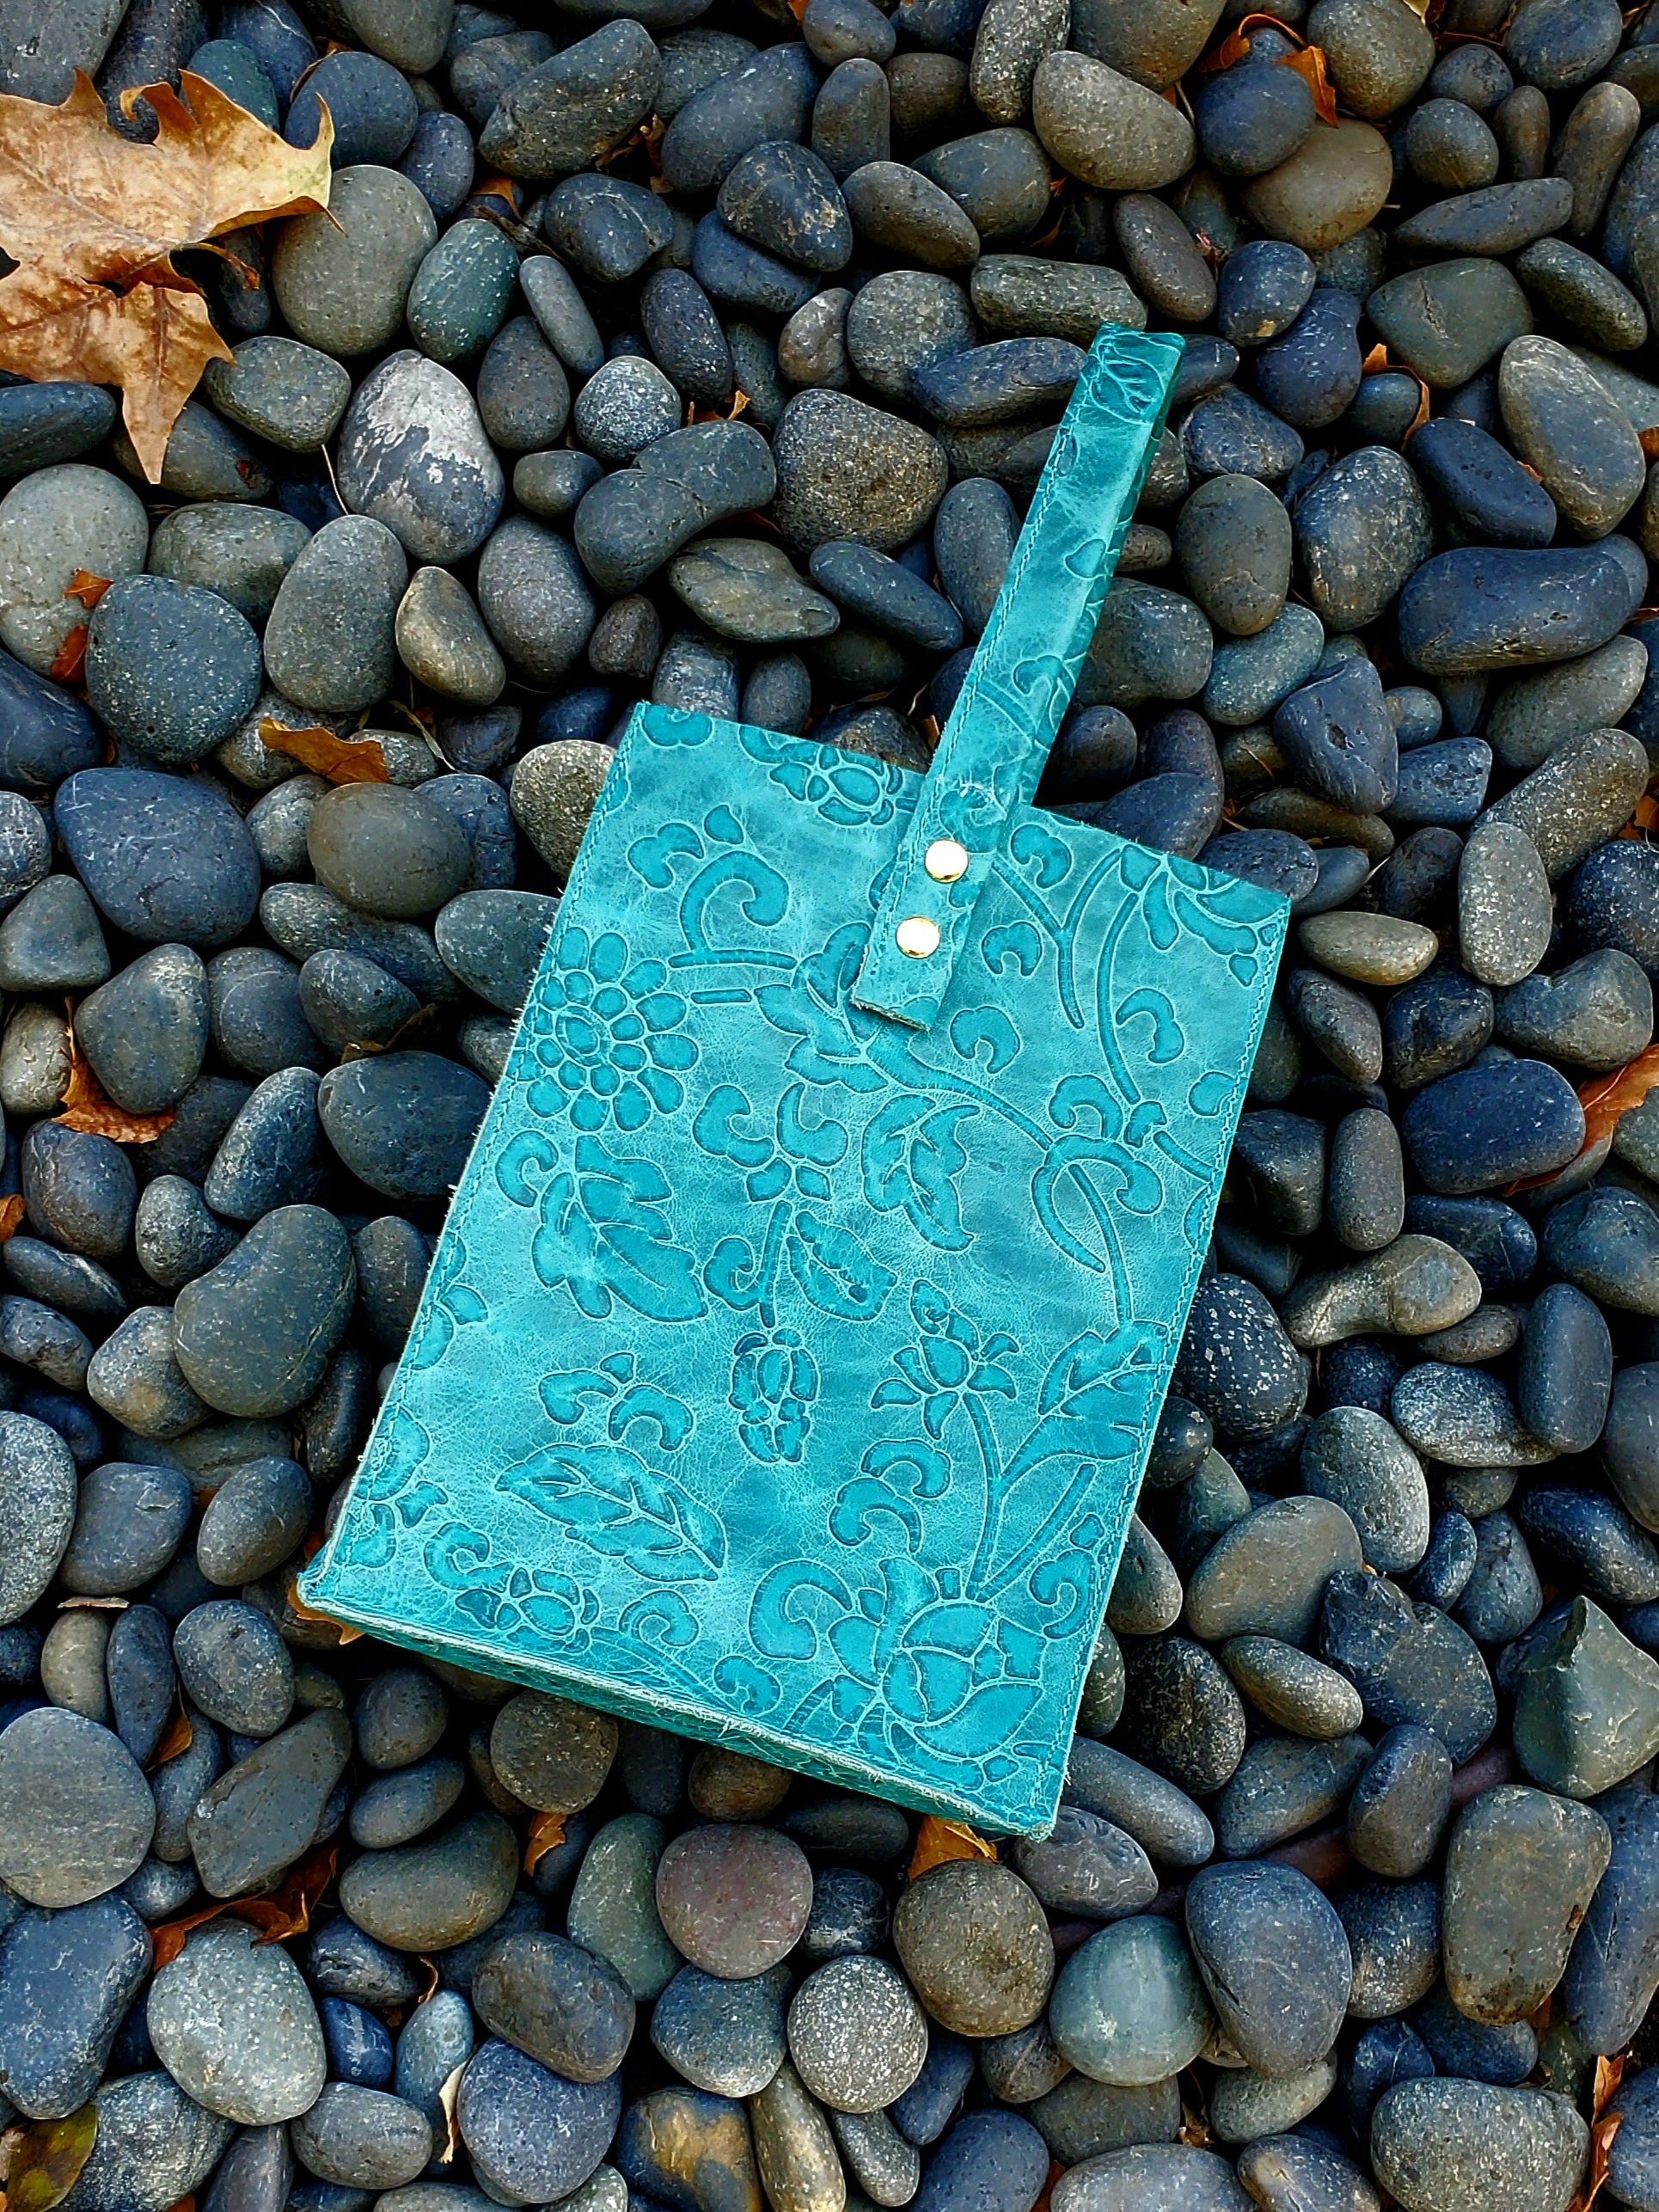 Turquoise blue leather bag with 1 handle made grio style in Los Angeles California 